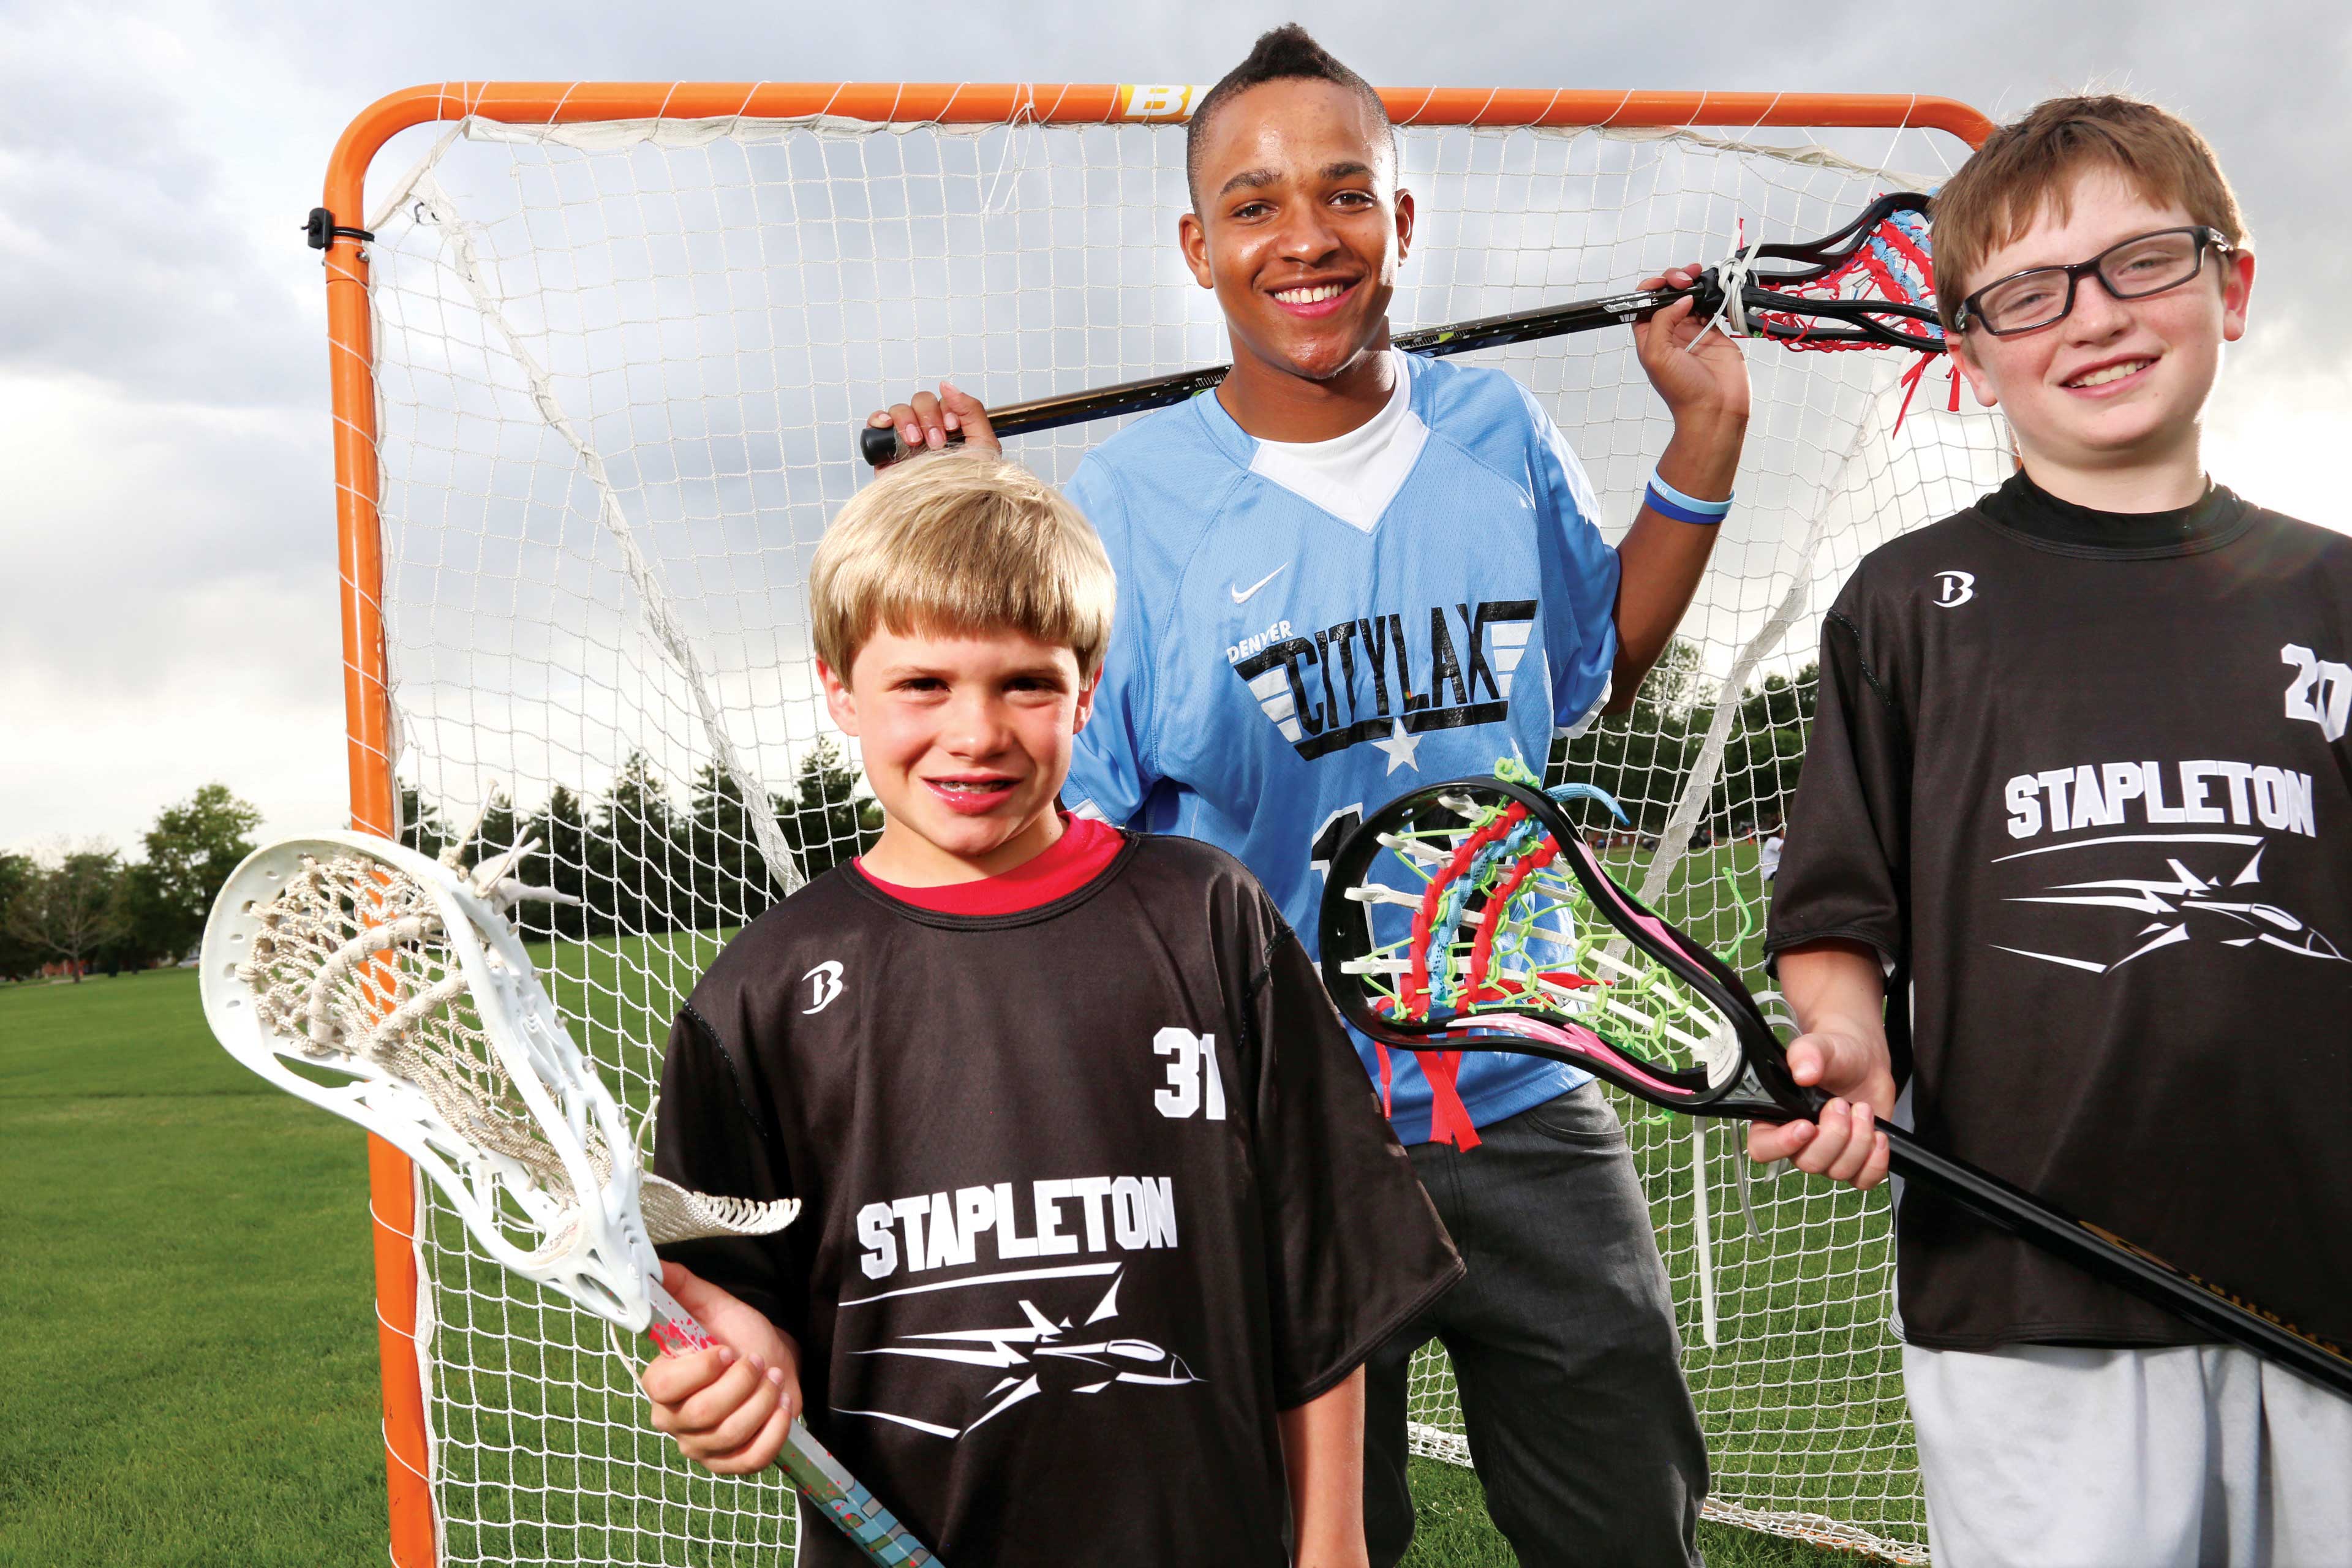 Charlie Jones, Trevon Hamlet and Cooper Silverstein were selected to participate in the opening ceremonies at the World Championship Lacrosse Games on July 10 at Dick’s Sporting Goods Park.